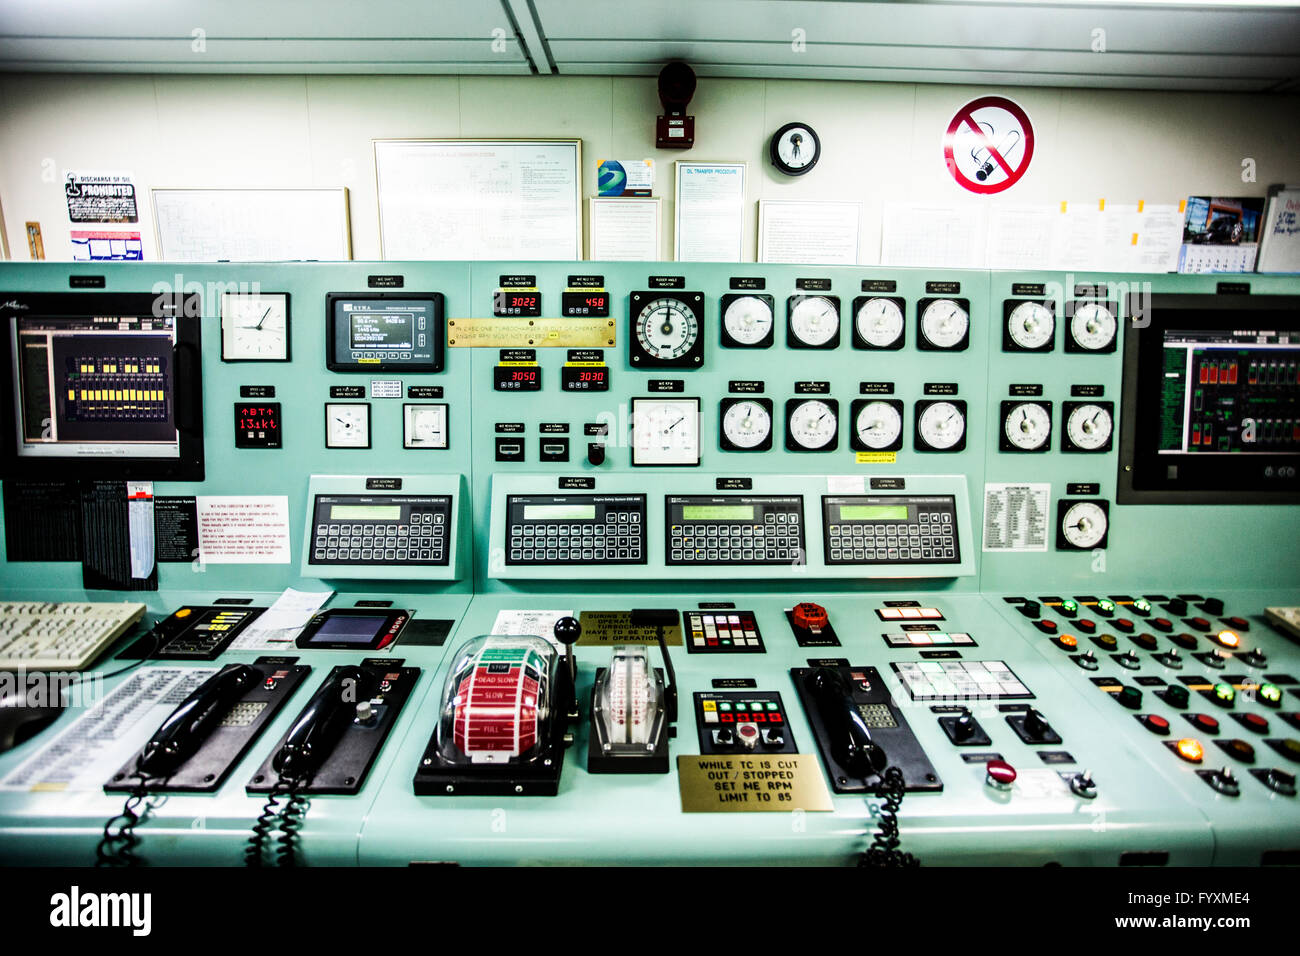 Control systems for the engine room on board a container ship. Stock Photo